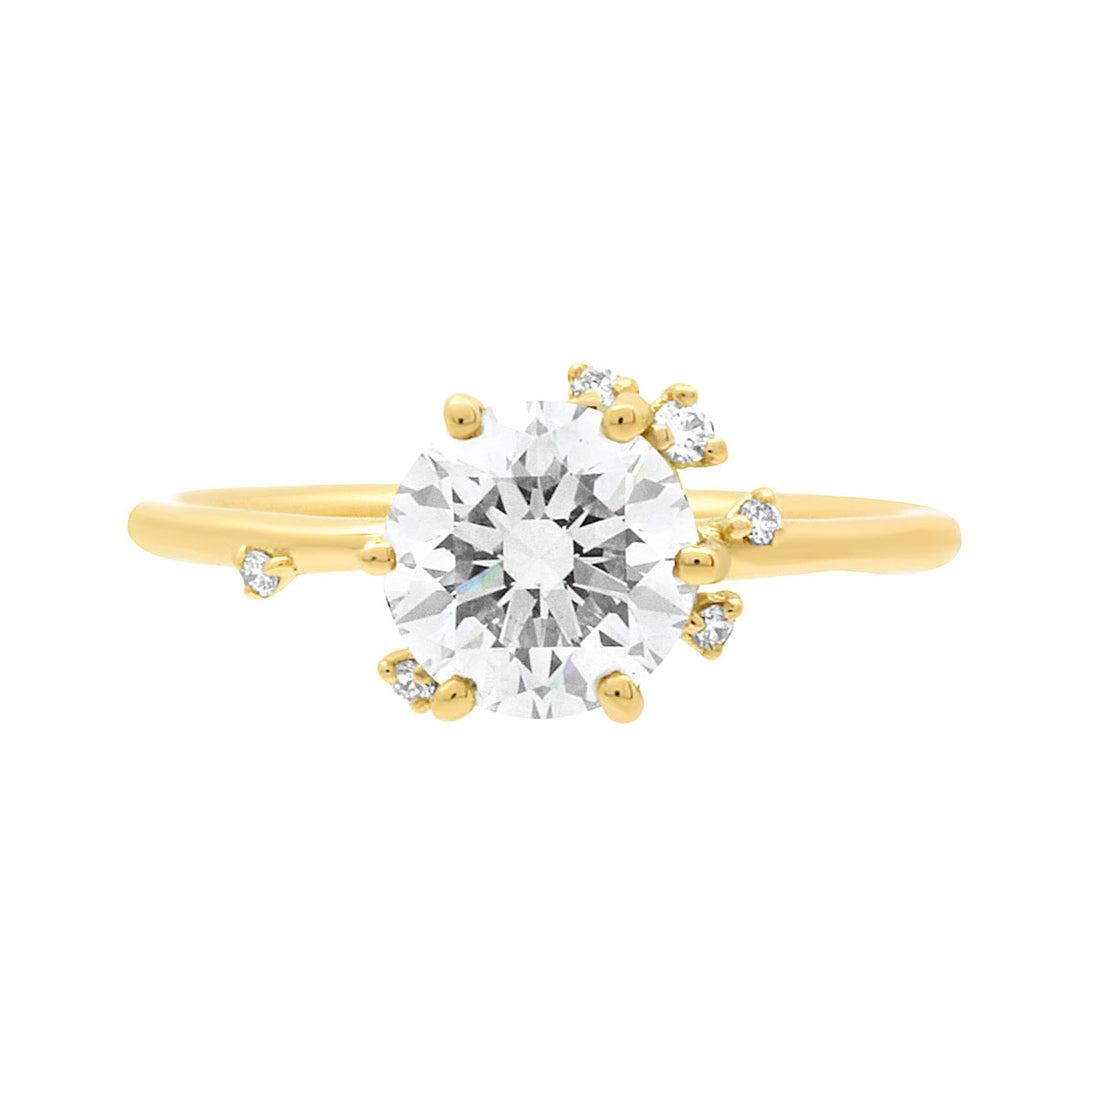 Made To Order Engagement ring in yellow gold laying flat